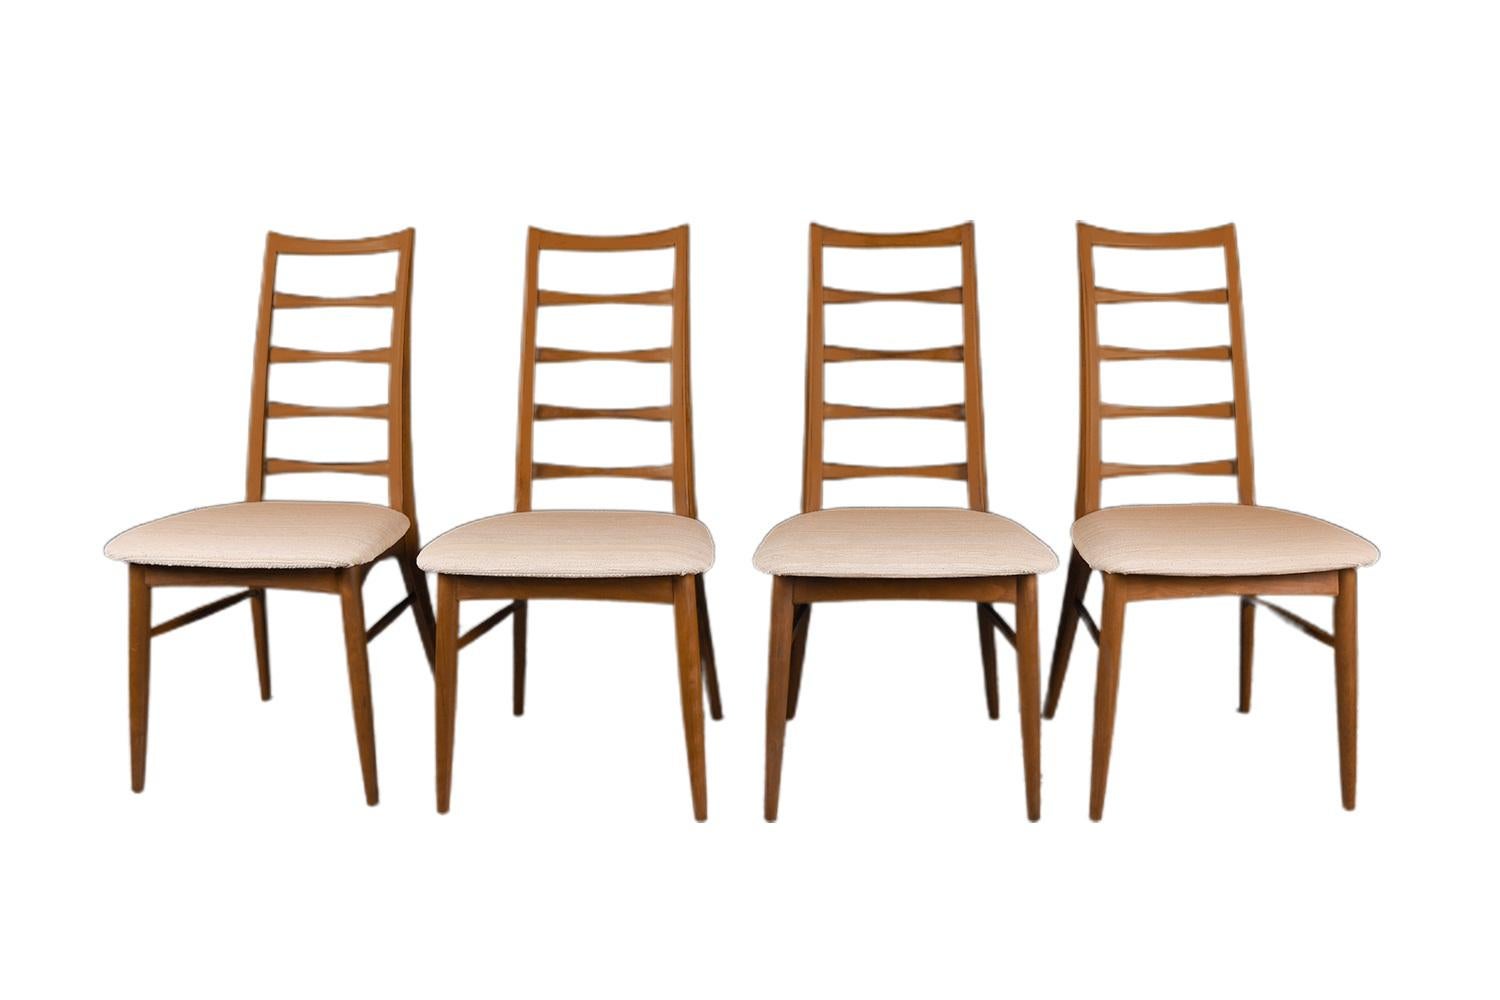 An outstanding set of six teak dining chairs designed by Niels Koefoed for Koefoeds Hornslet, model “Lis” made in Denmark, circa 1960s. This stunning set of six ladder back teak chairs features two arm chairs and four side chairs in original